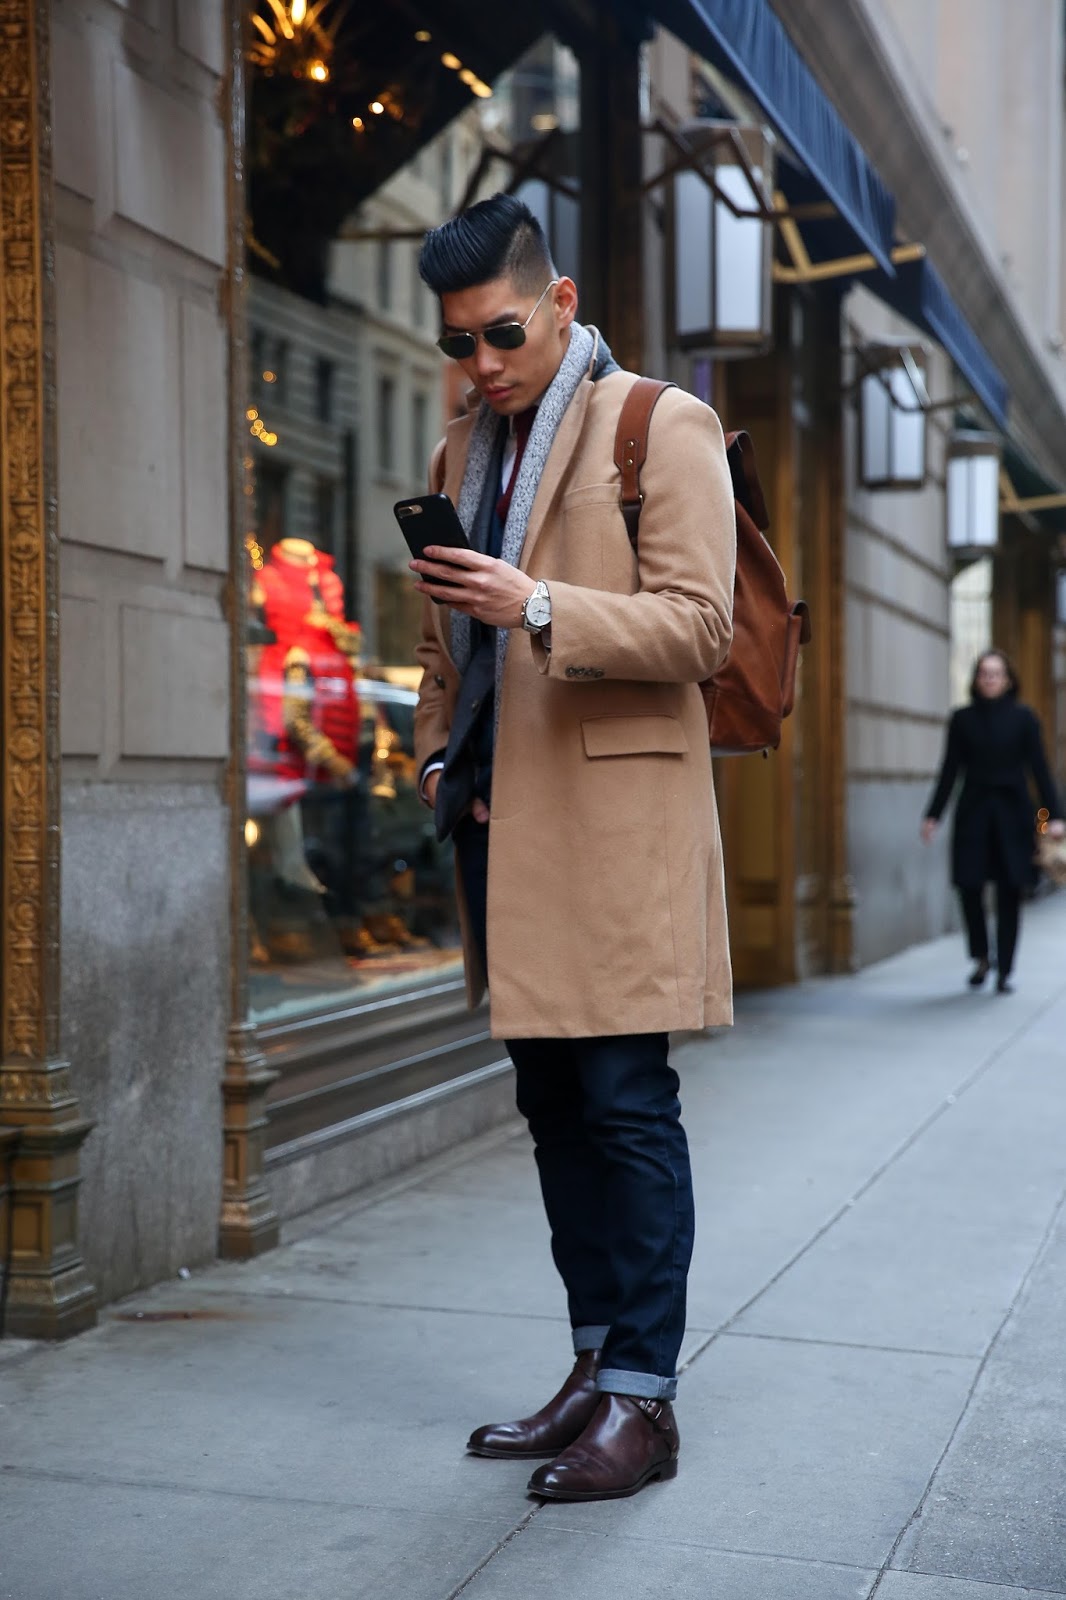 Levitate Style menswear NYC Holiday with Otterbox - Leo Chan and Alicia Mara